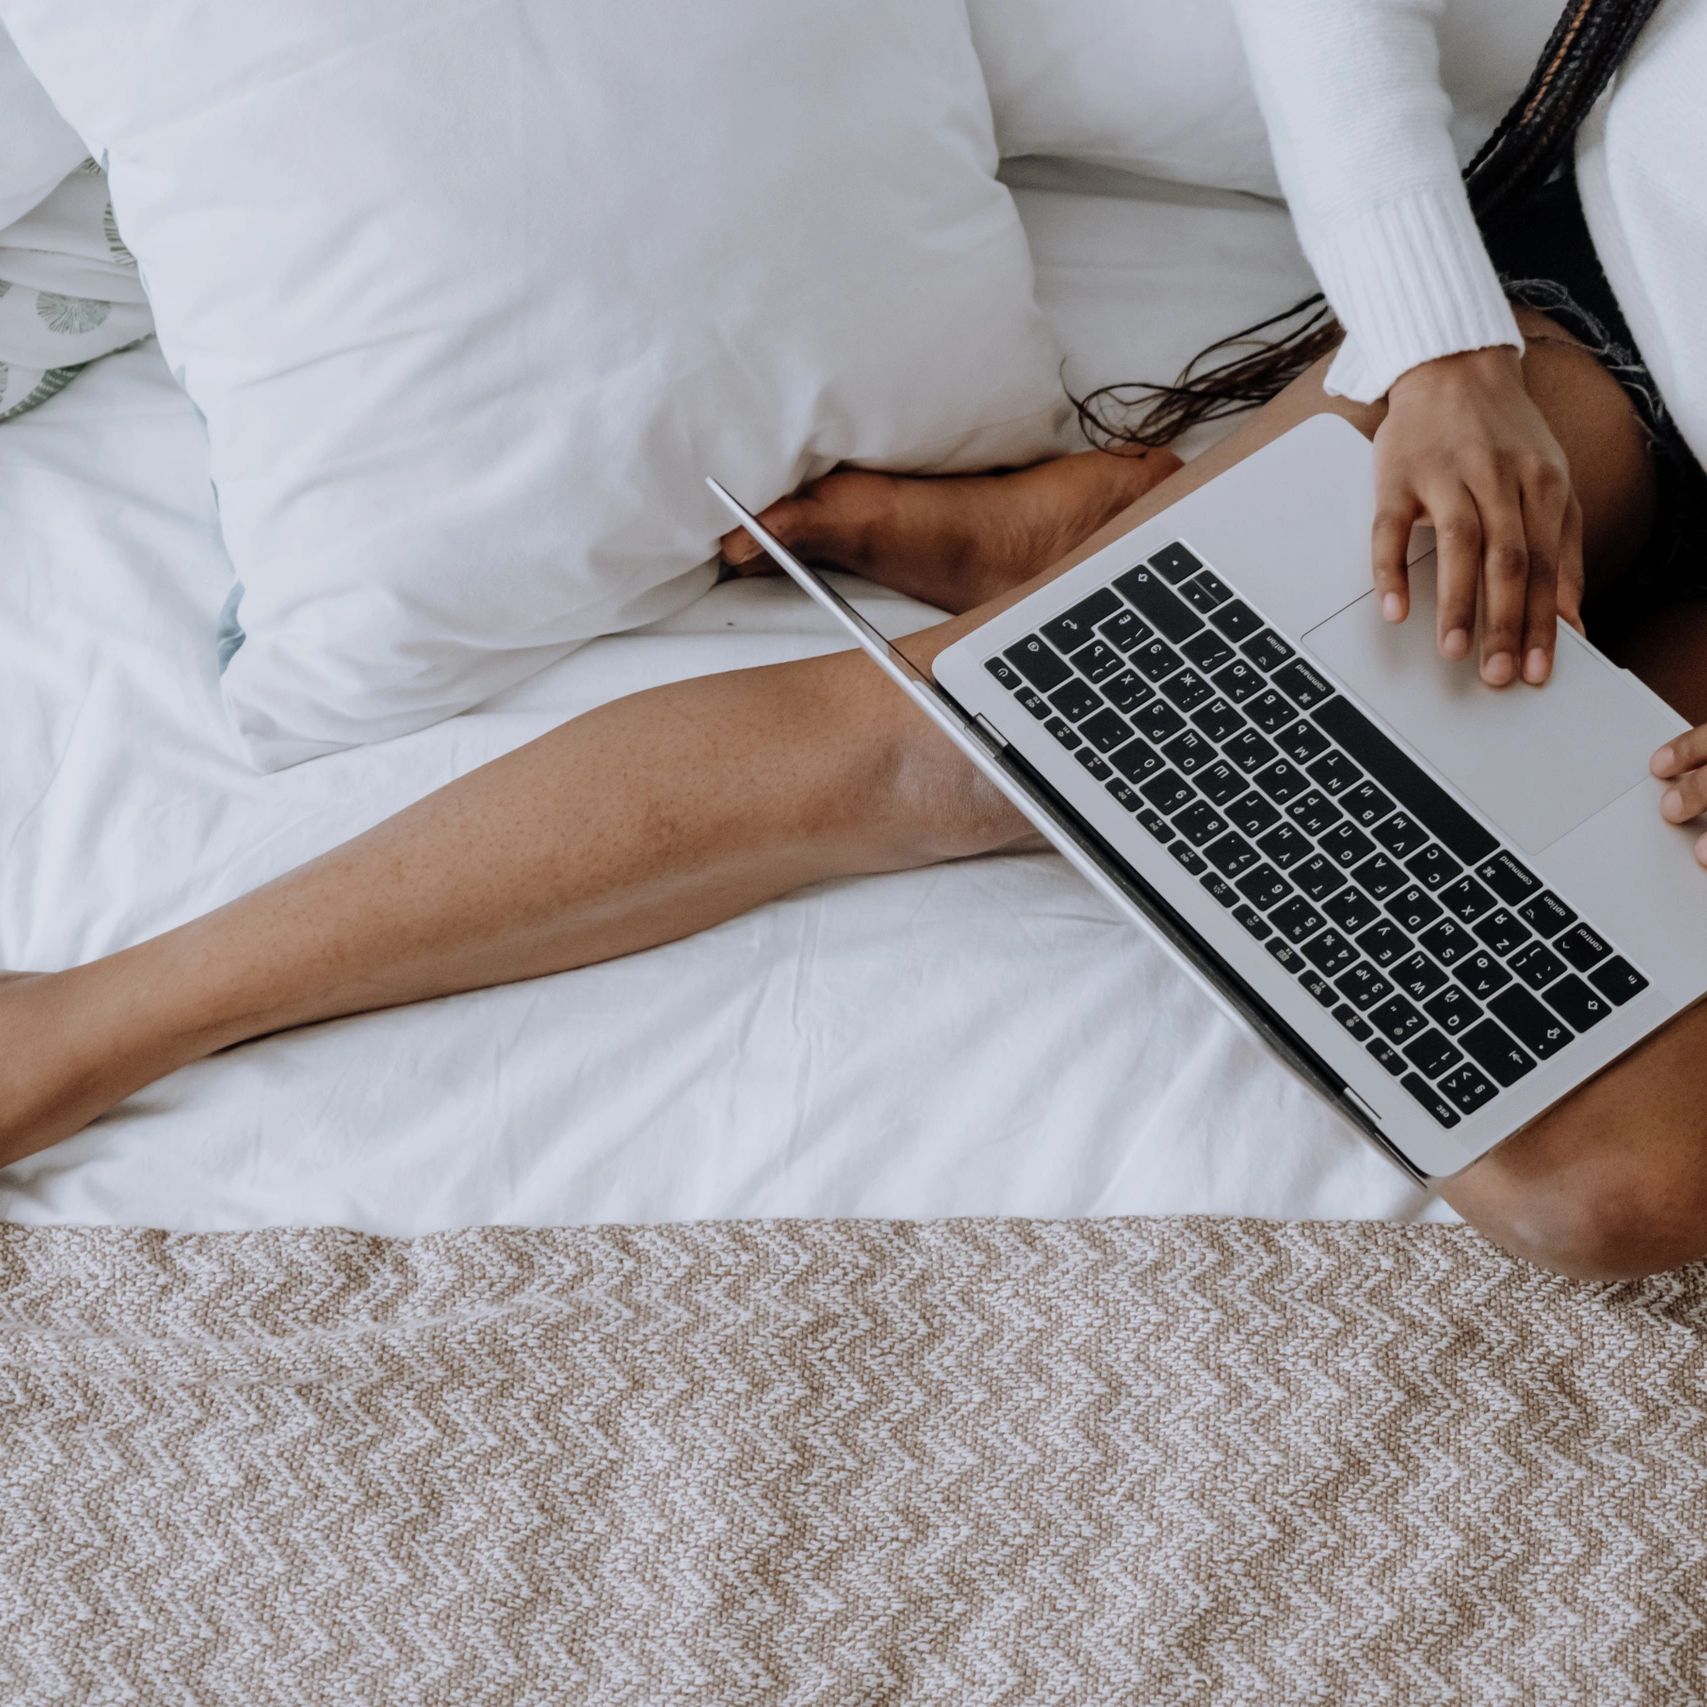 woman sitting on a bed with a laptop.